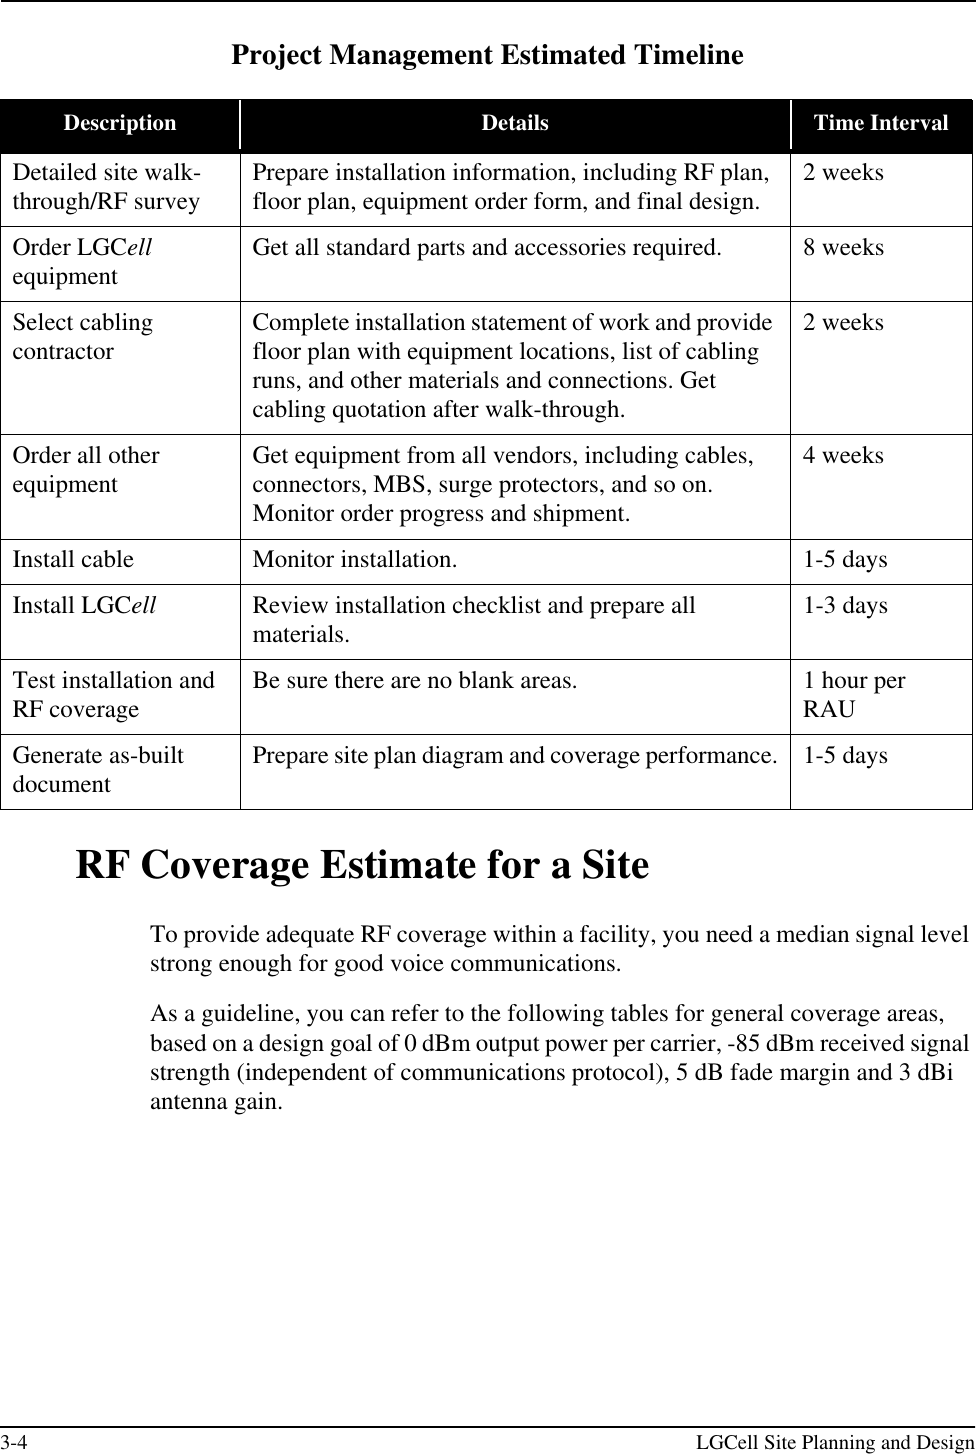 3-4 LGCell Site Planning and DesignProject Management Estimated TimelineRF Coverage Estimate for a SiteTo provide adequate RF coverage within a facility, you need a median signal level strong enough for good voice communications. As a guideline, you can refer to the following tables for general coverage areas, based on a design goal of 0 dBm output power per carrier, -85 dBm received signal strength (independent of communications protocol), 5 dB fade margin and 3 dBi antenna gain. Description Details Time IntervalDetailed site walk-through/RF survey Prepare installation information, including RF plan, floor plan, equipment order form, and final design. 2 weeksOrder LGCell equipment Get all standard parts and accessories required. 8 weeksSelect cabling contractor Complete installation statement of work and provide floor plan with equipment locations, list of cabling runs, and other materials and connections. Get cabling quotation after walk-through.2 weeksOrder all other equipment Get equipment from all vendors, including cables, connectors, MBS, surge protectors, and so on. Monitor order progress and shipment.4 weeksInstall cable Monitor installation. 1-5 daysInstall LGCell  Review installation checklist and prepare all materials. 1-3 daysTest installation and RF coverage Be sure there are no blank areas. 1 hour per RAUGenerate as-built document Prepare site plan diagram and coverage performance. 1-5 days